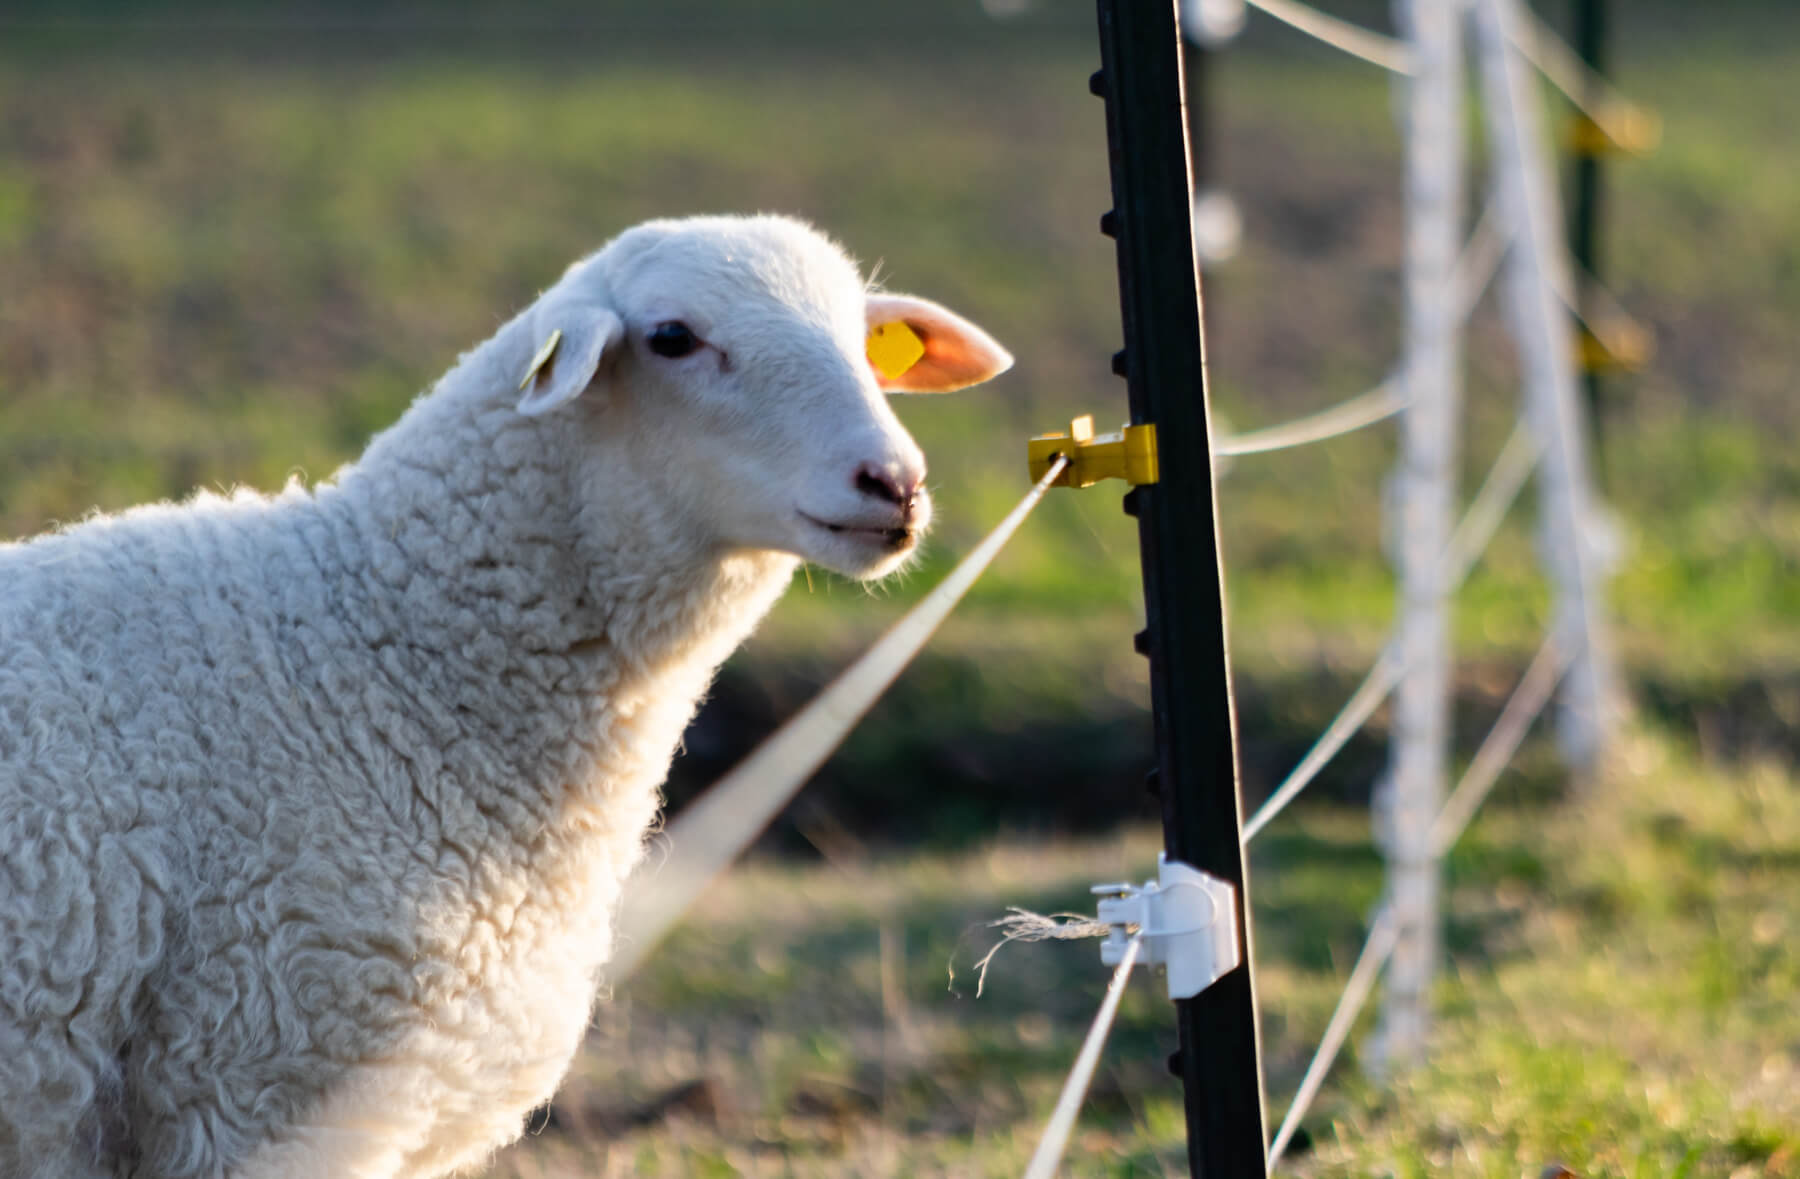 A white sheep looks out into the distance through a three-wired electric fence